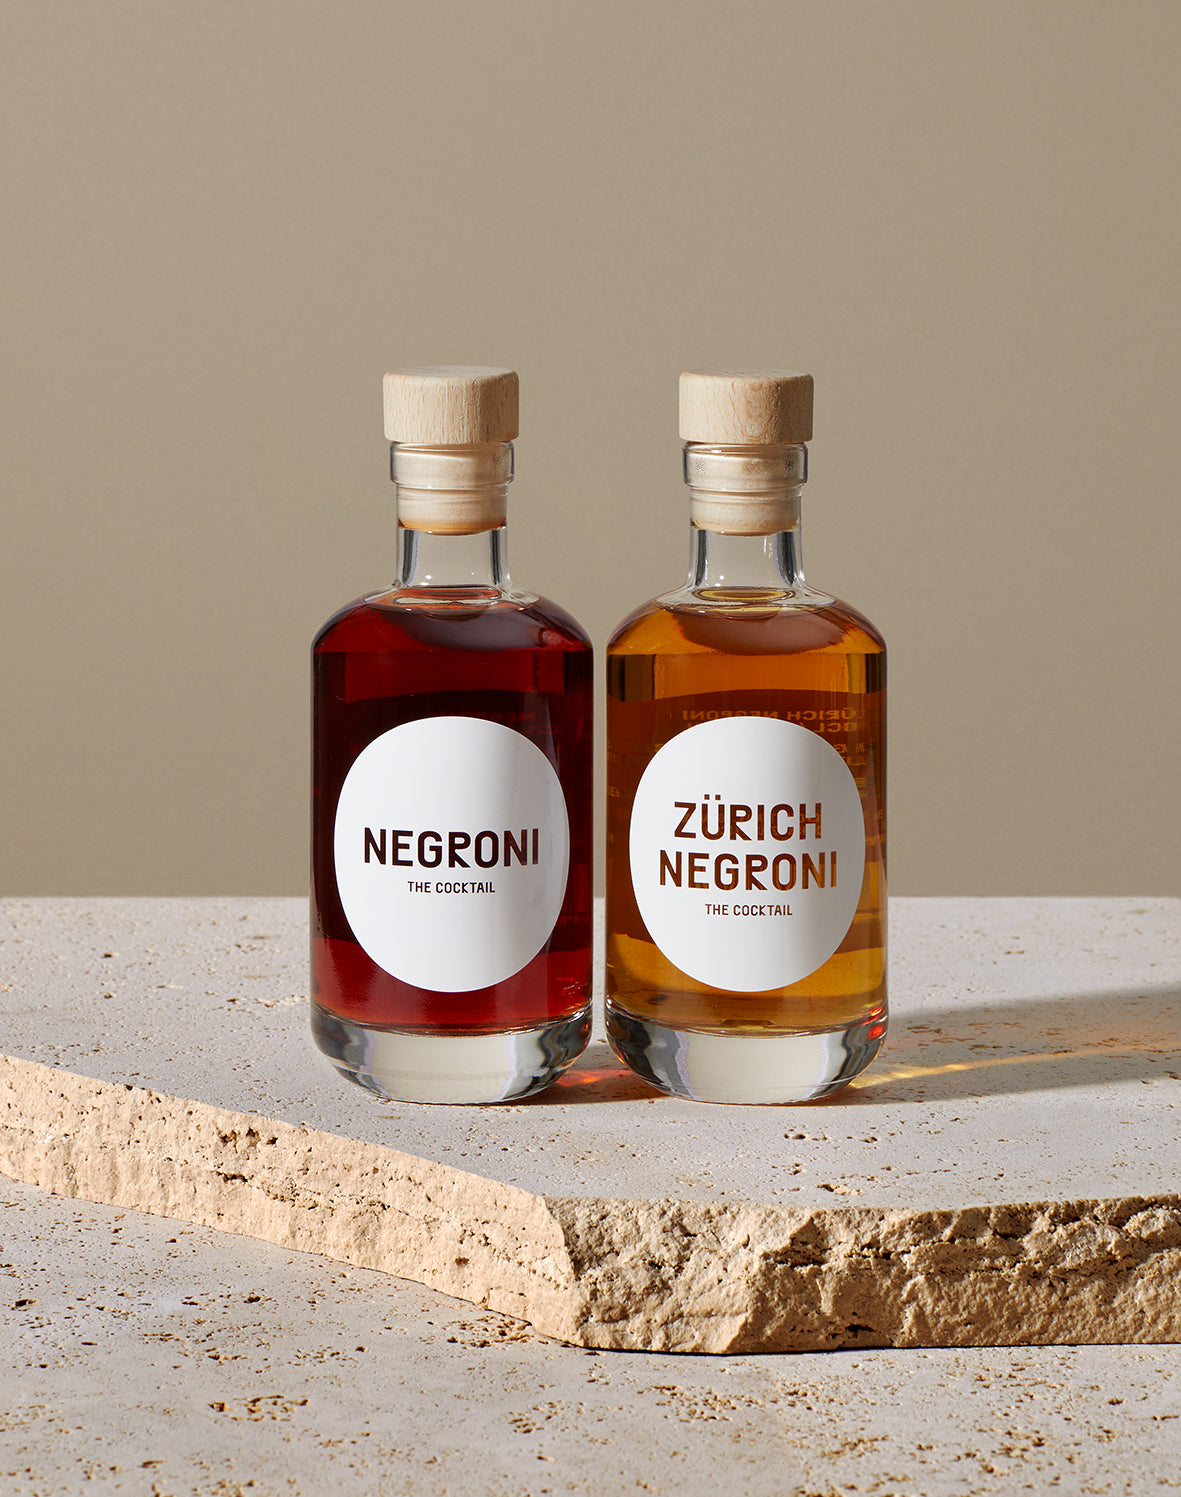 "The Little Ones" in doubles - Negroni &amp; Zurich Negroni